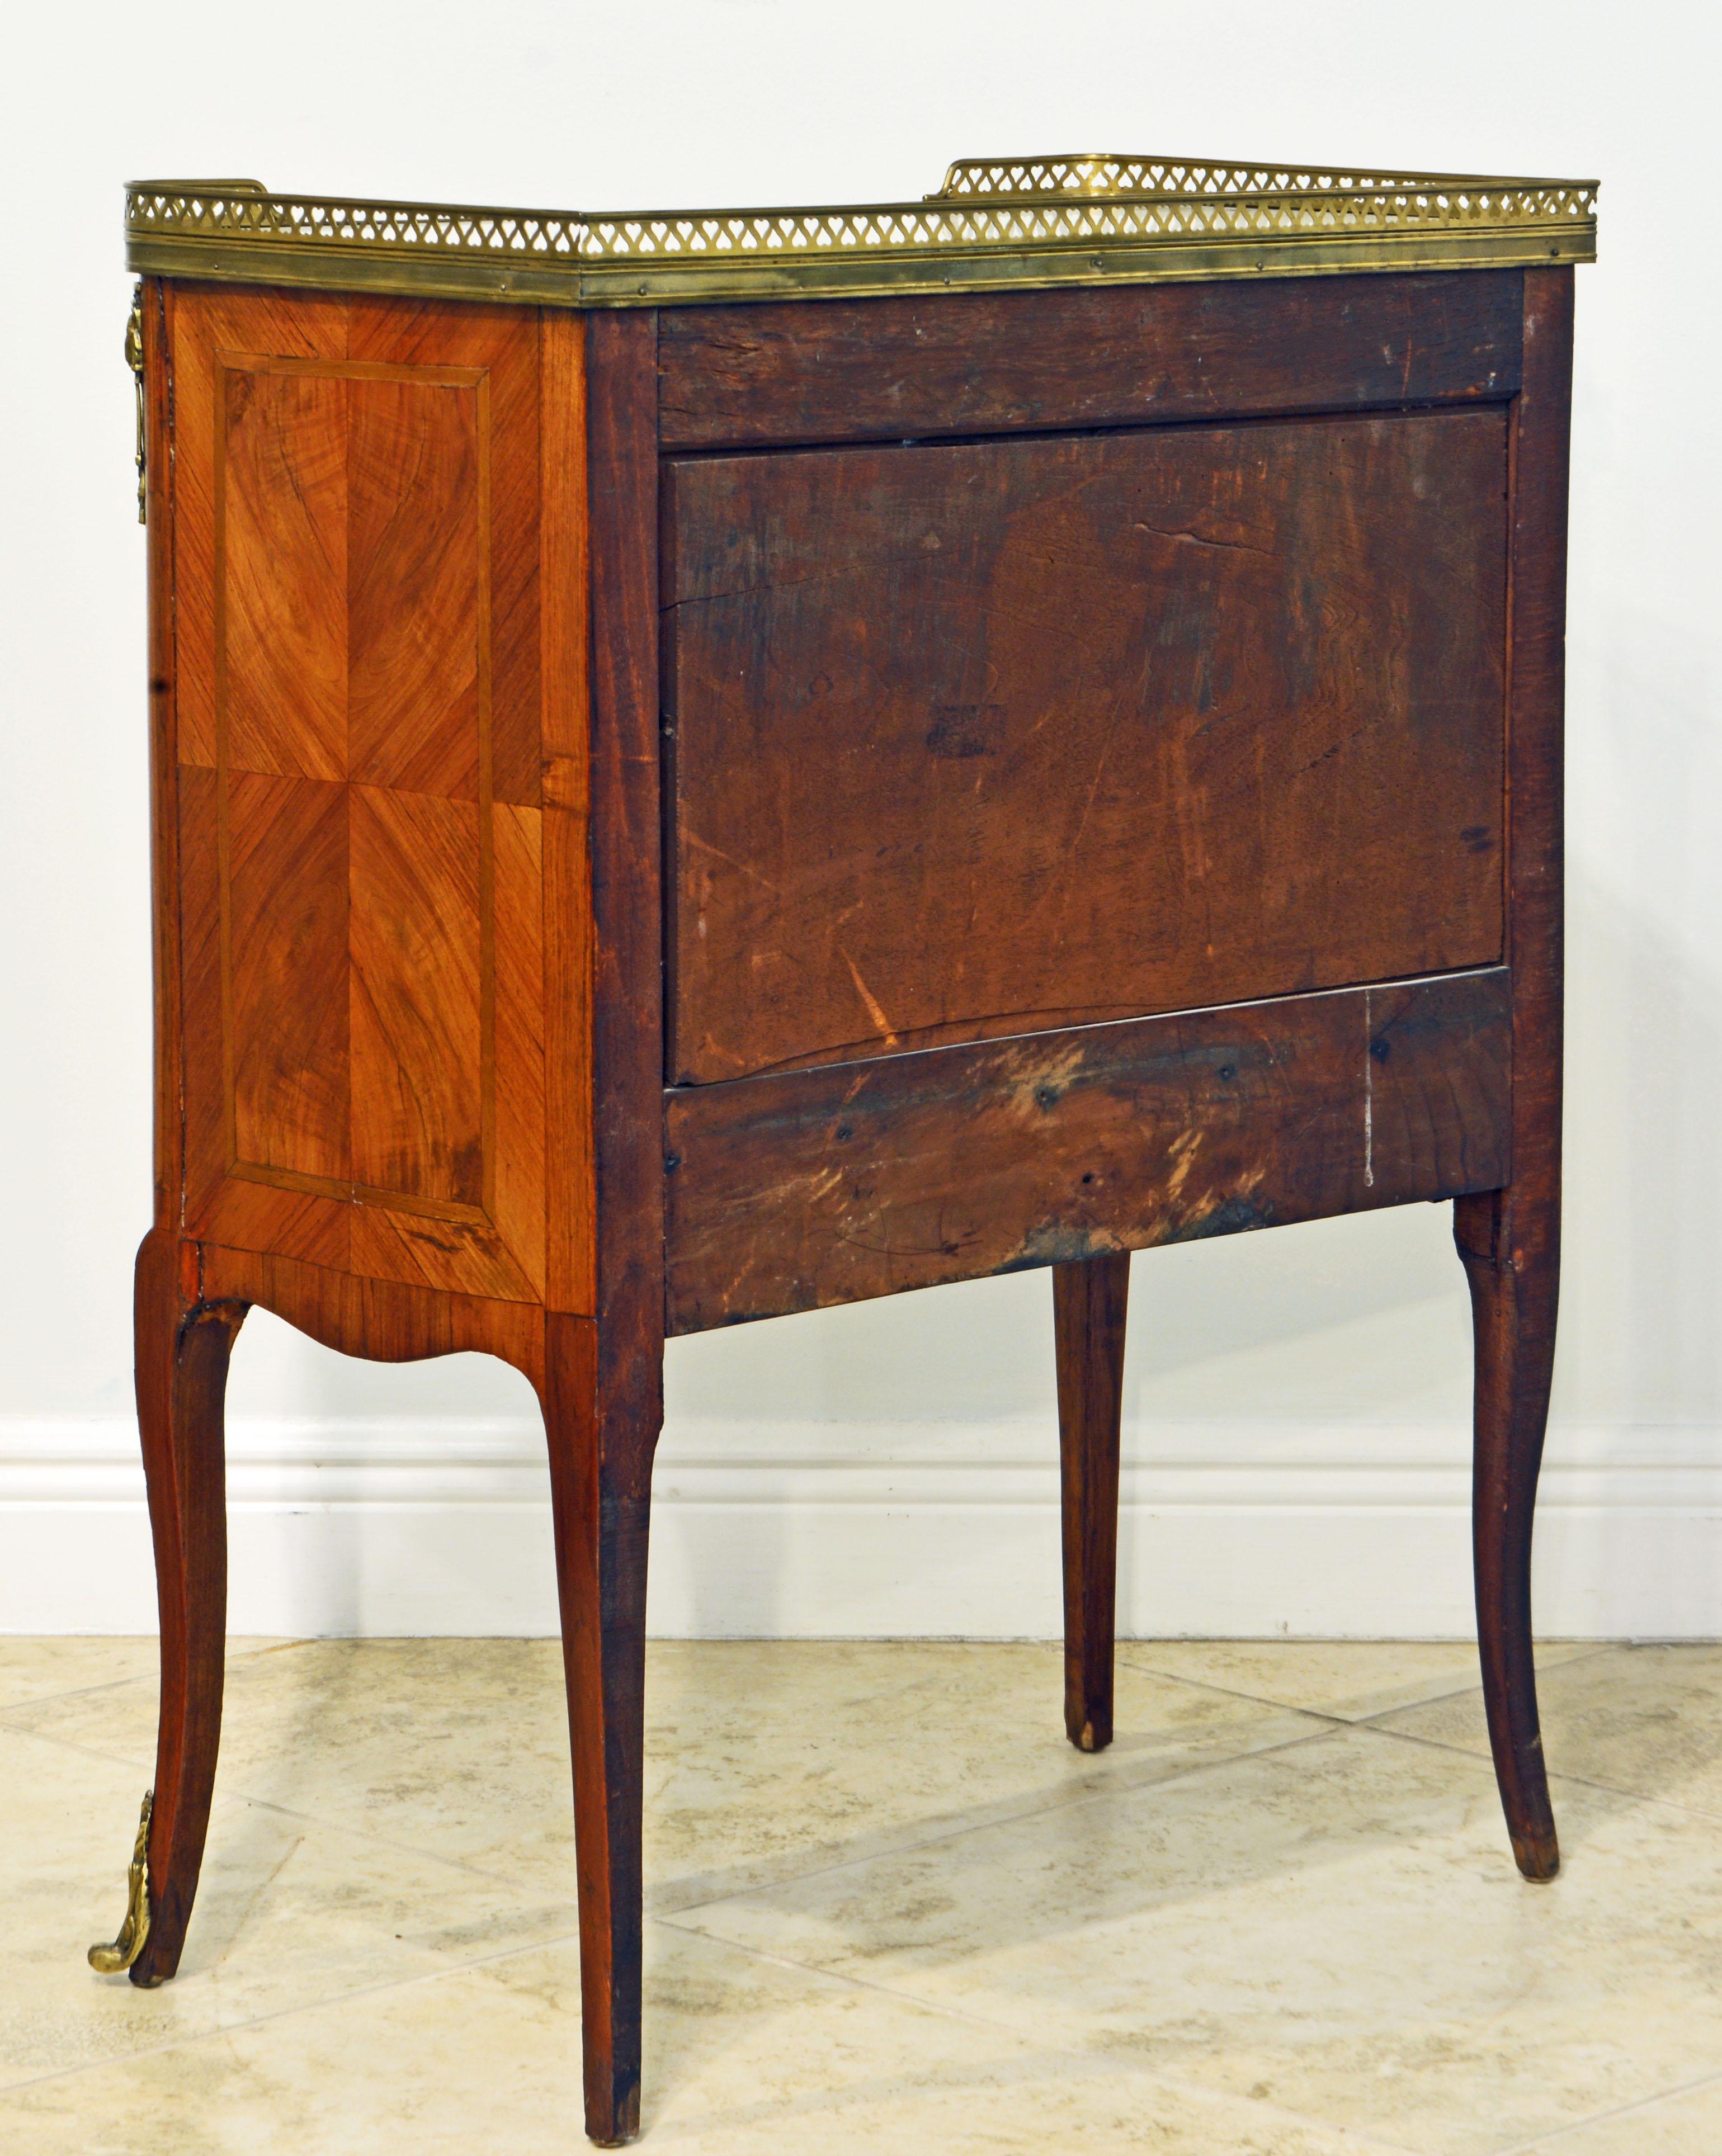 Gilt French Ormolu Mounted Parquetry Marble-Top Four-Drawer Tambour Door Commode